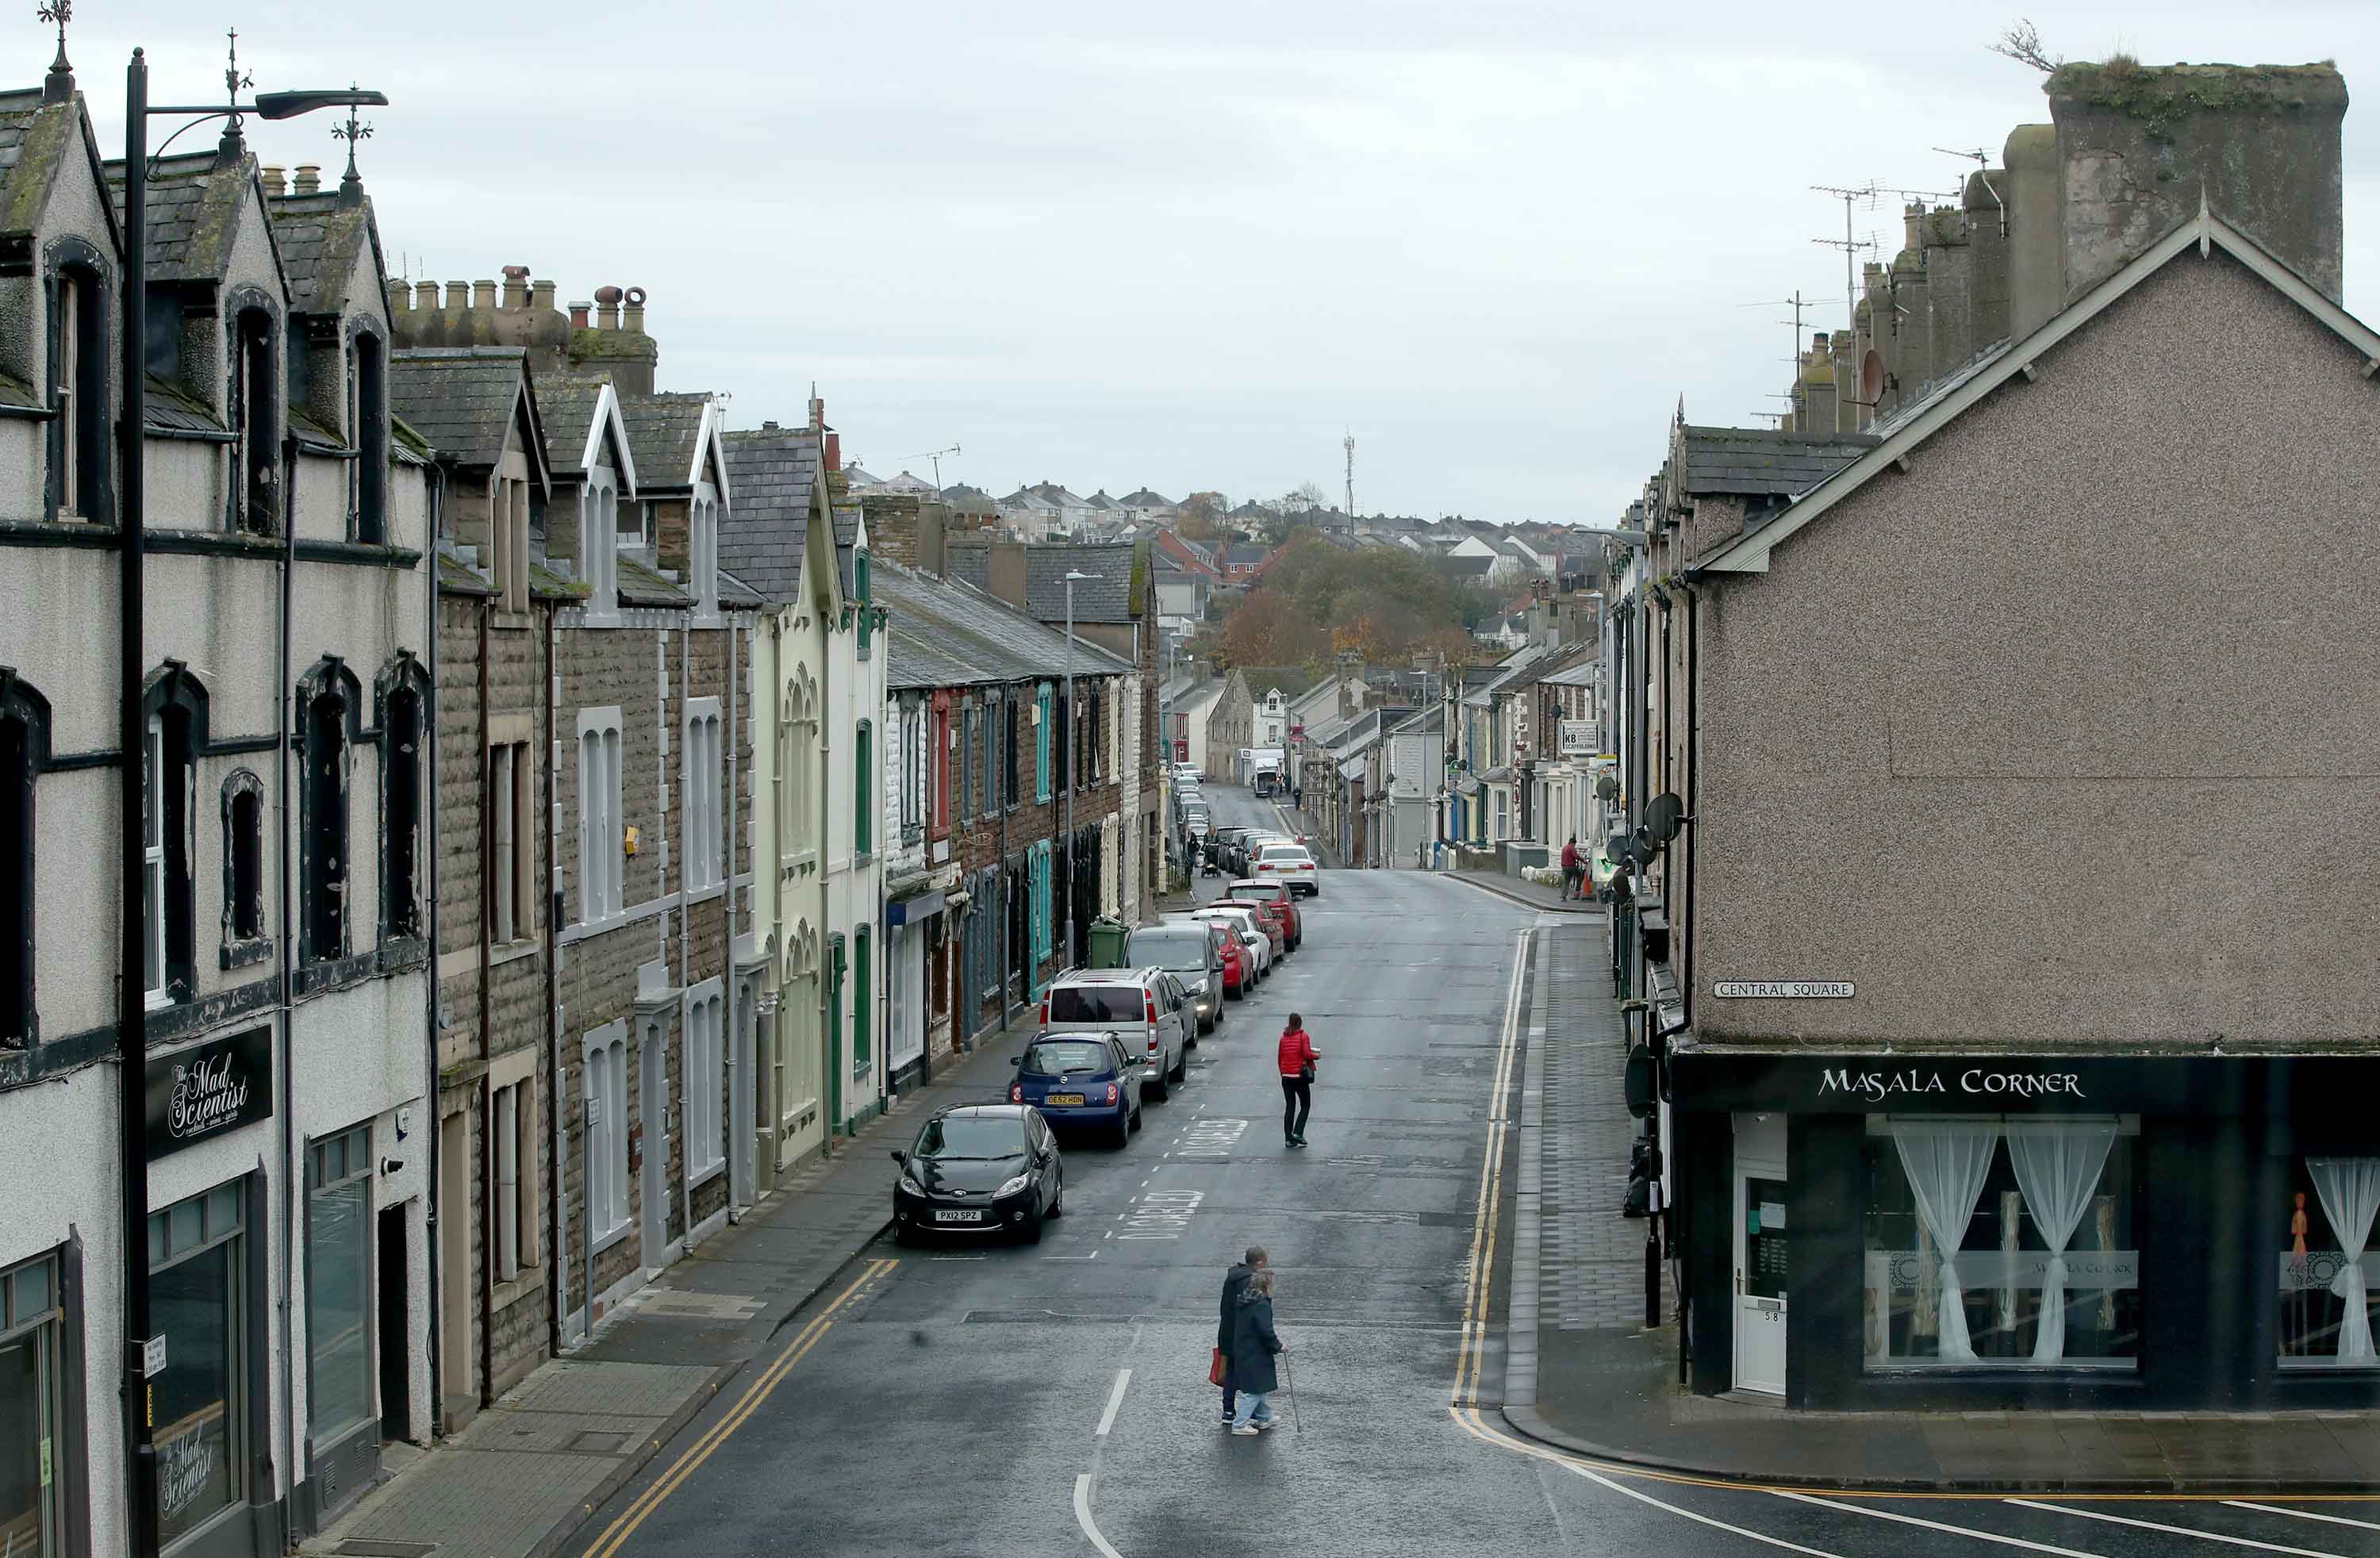 A general view of Workington, England on November 6. Photo: Danny Lawson/PA Images via Getty Images